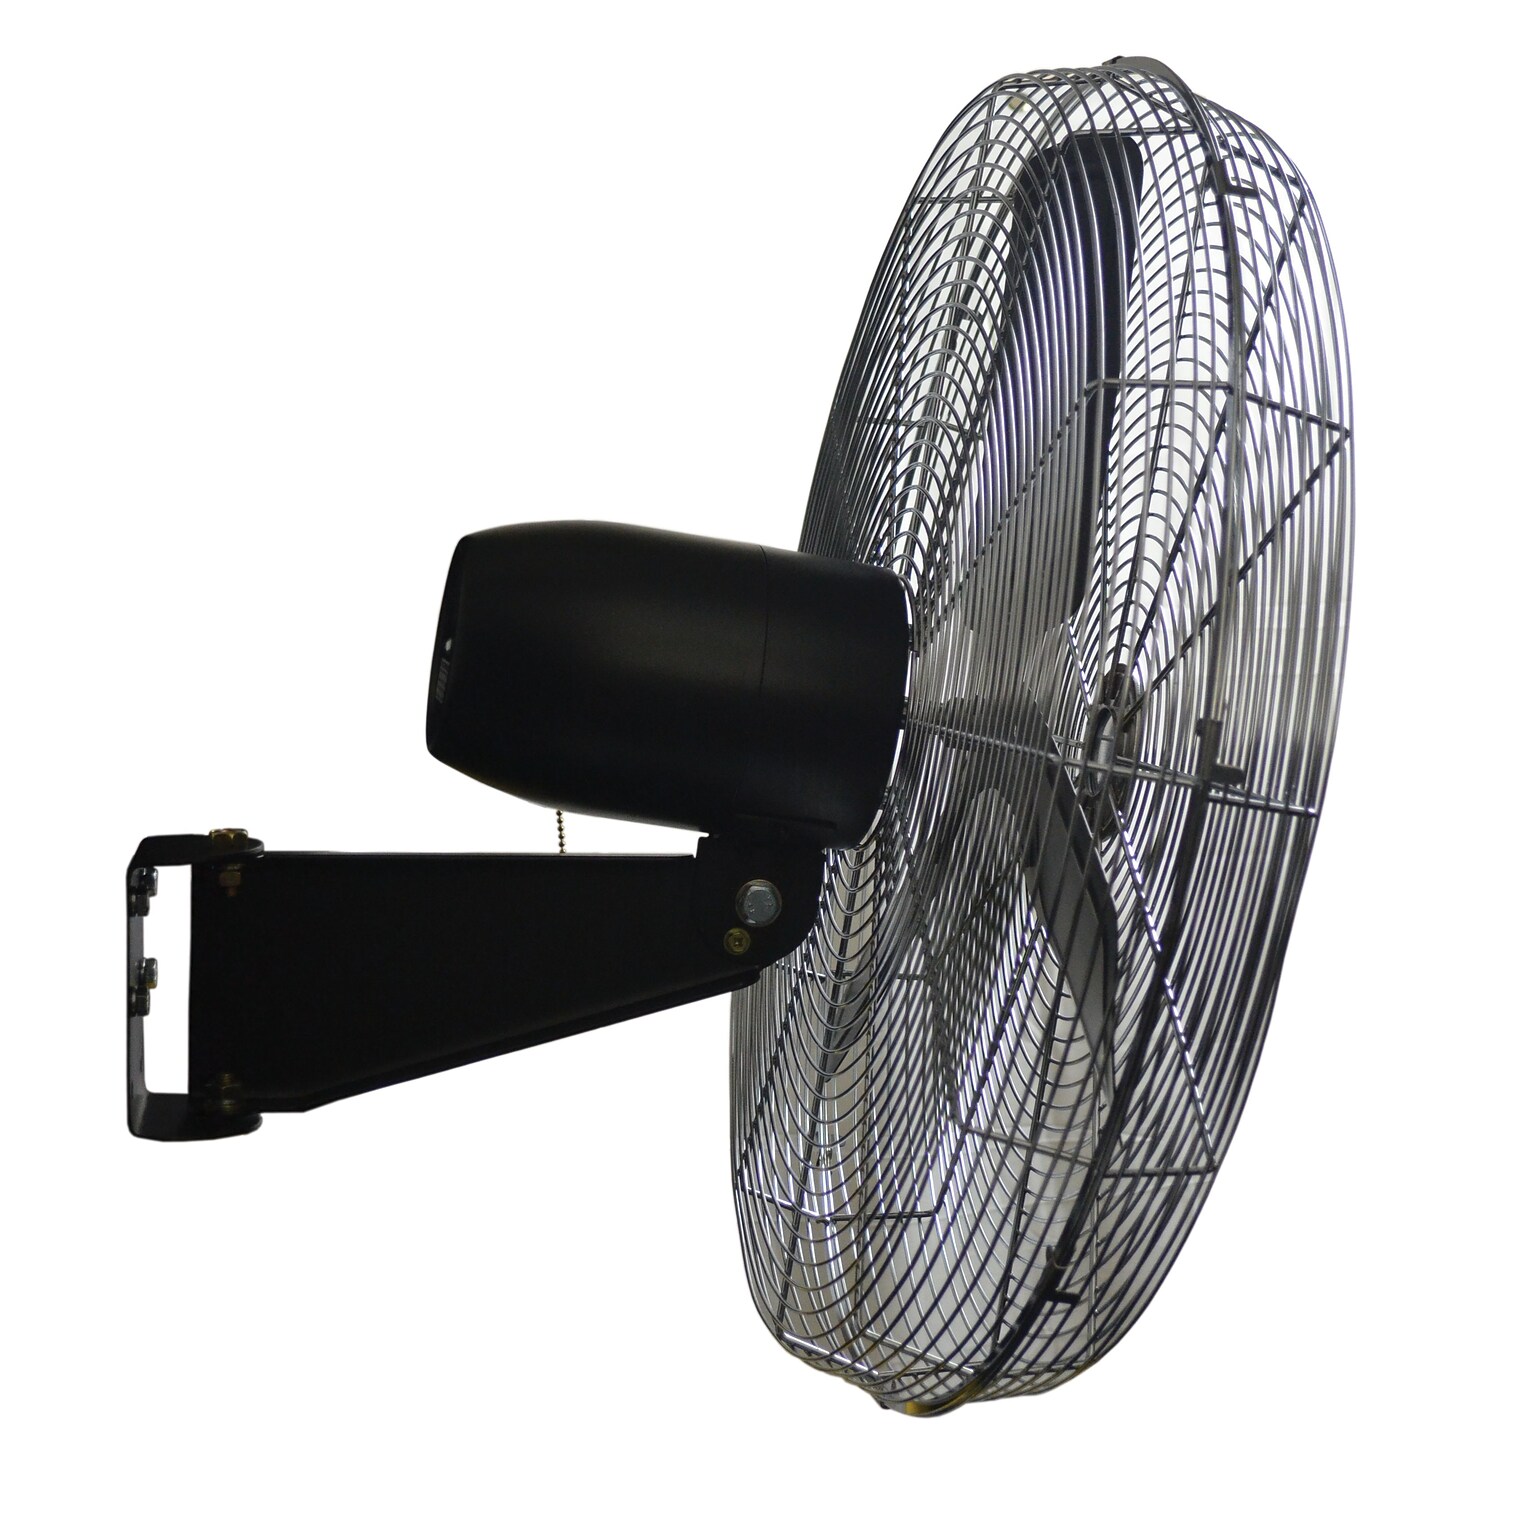 TPI Commercial 24 Wall Mount Fan, 3-Speed, Gray/Silver (CACU24W)